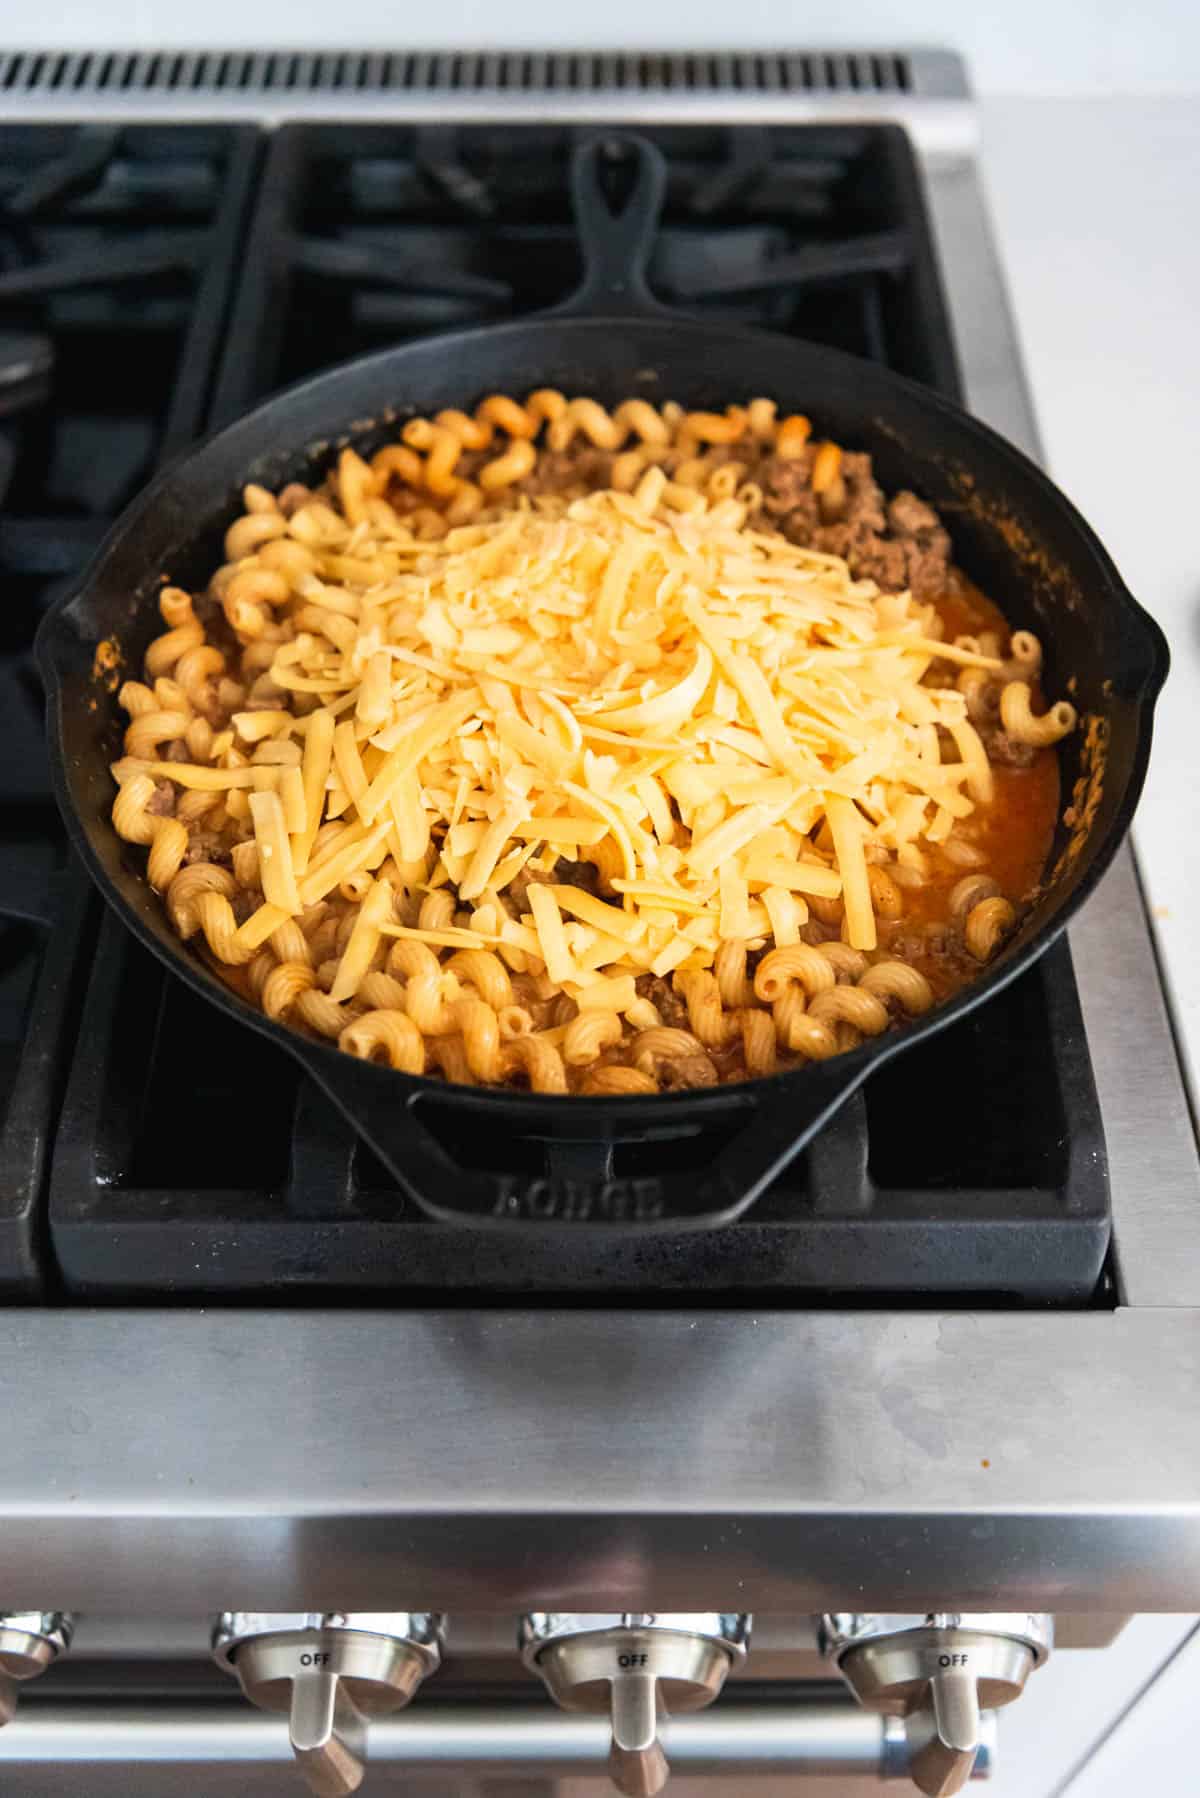 An image of shredded cheese being added to cooked pasta and ground beef in a cast iron skillet.